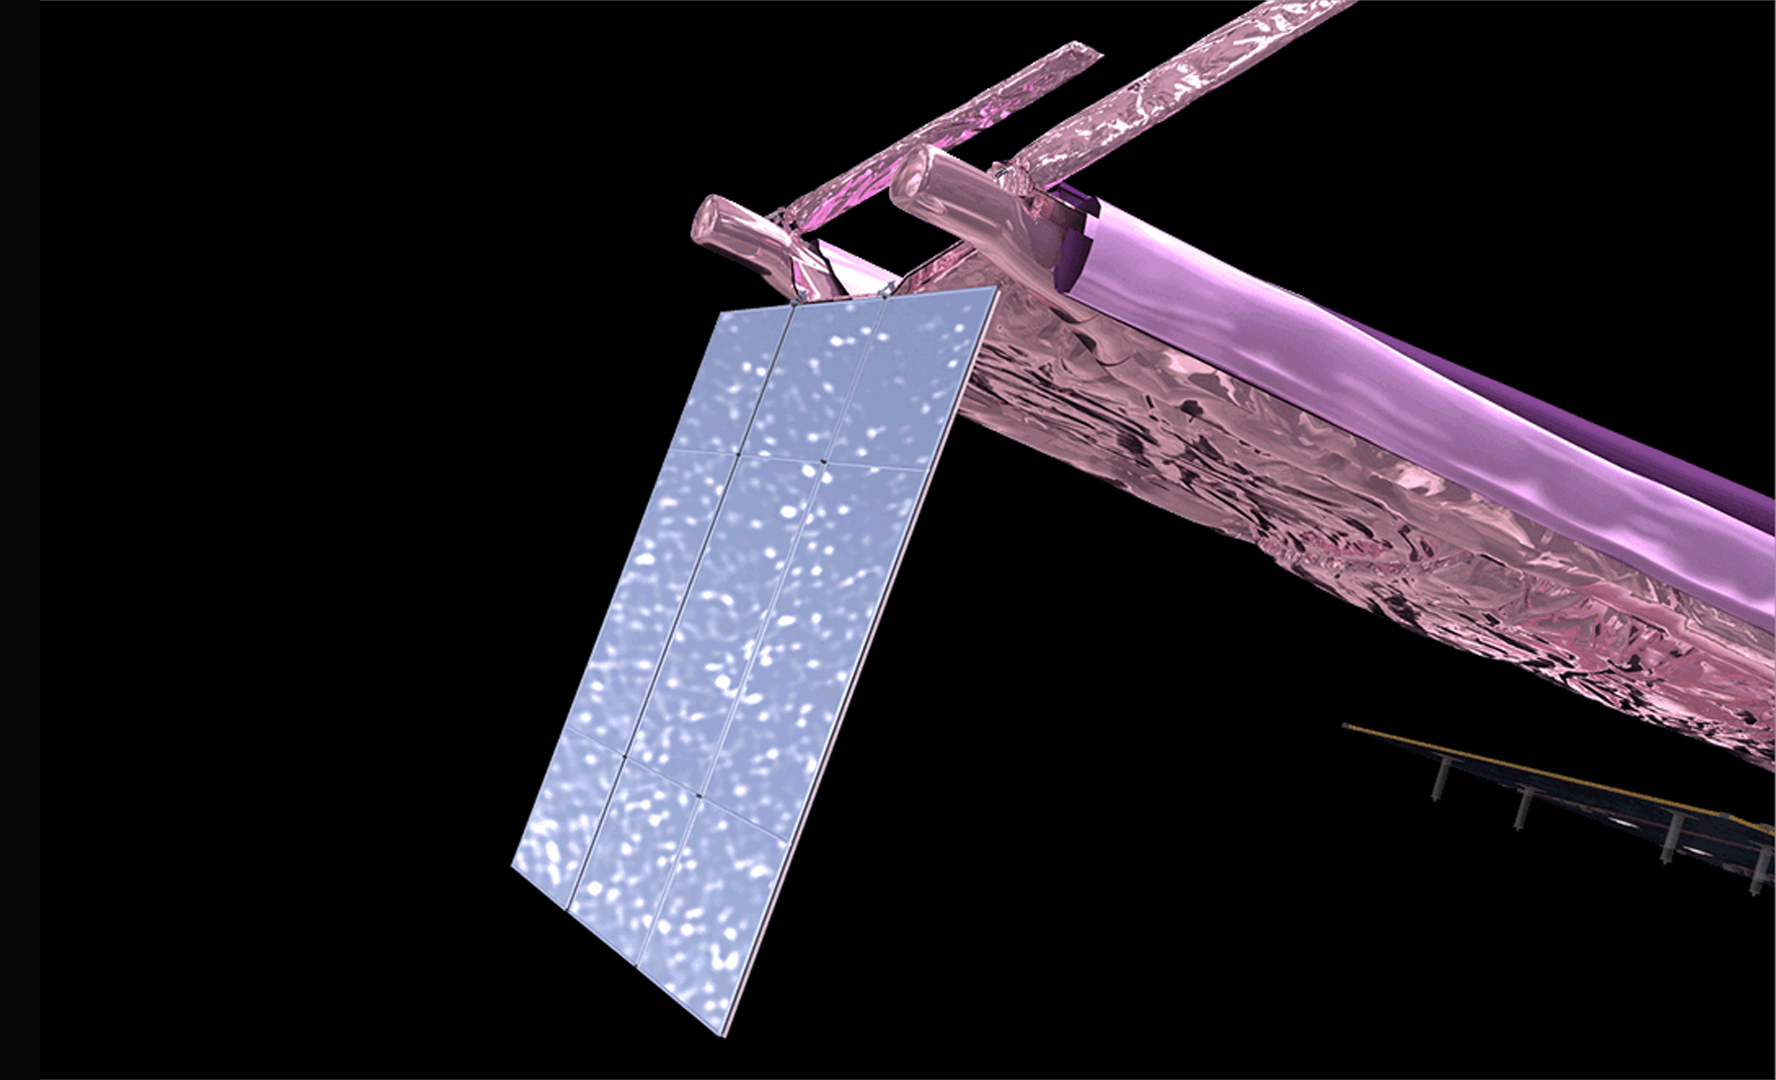 The aft momentum flap of the James Webb Space Telescope (bottom left) is seen in its deployed configuration in this NASA graphic.